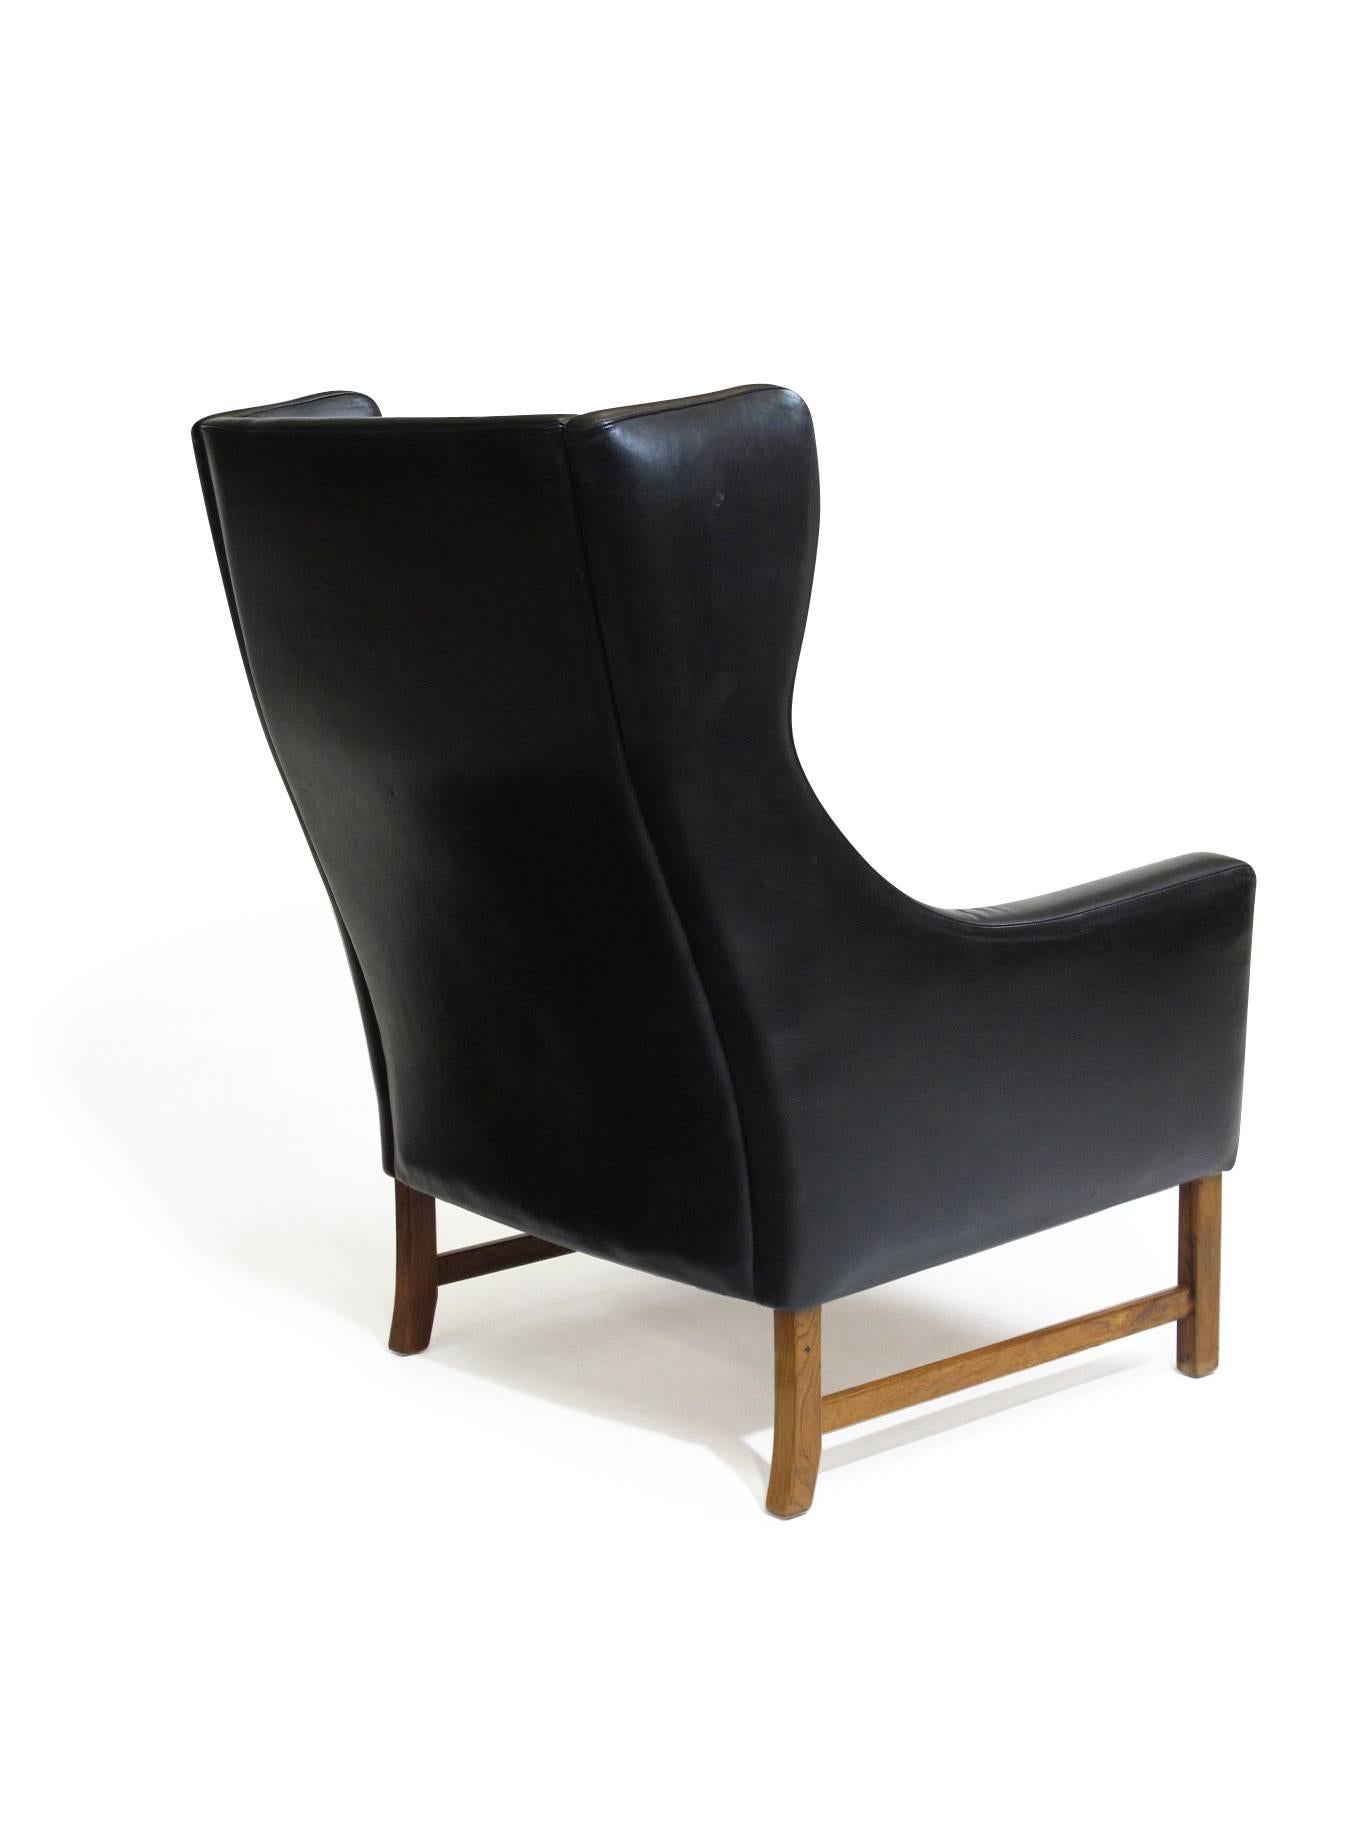 Fredrik Kayser Rosewood and Black Leather High-Back Danish Lounge Chair In Good Condition In Oakland, CA